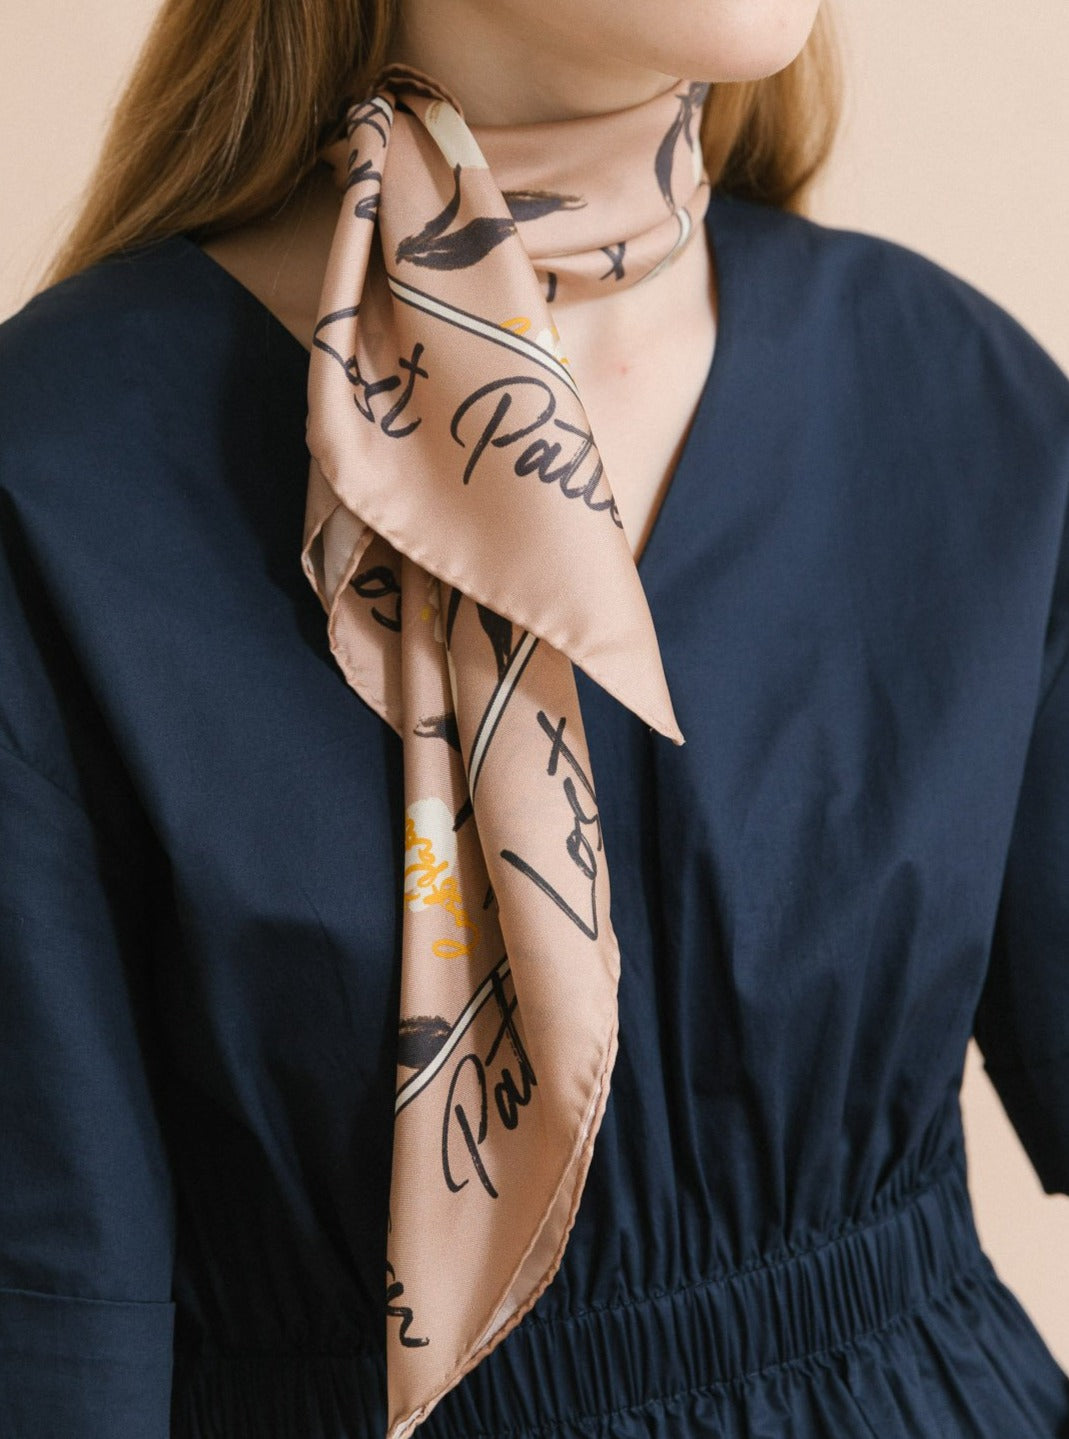 How To Wear A Square Lv Scarf